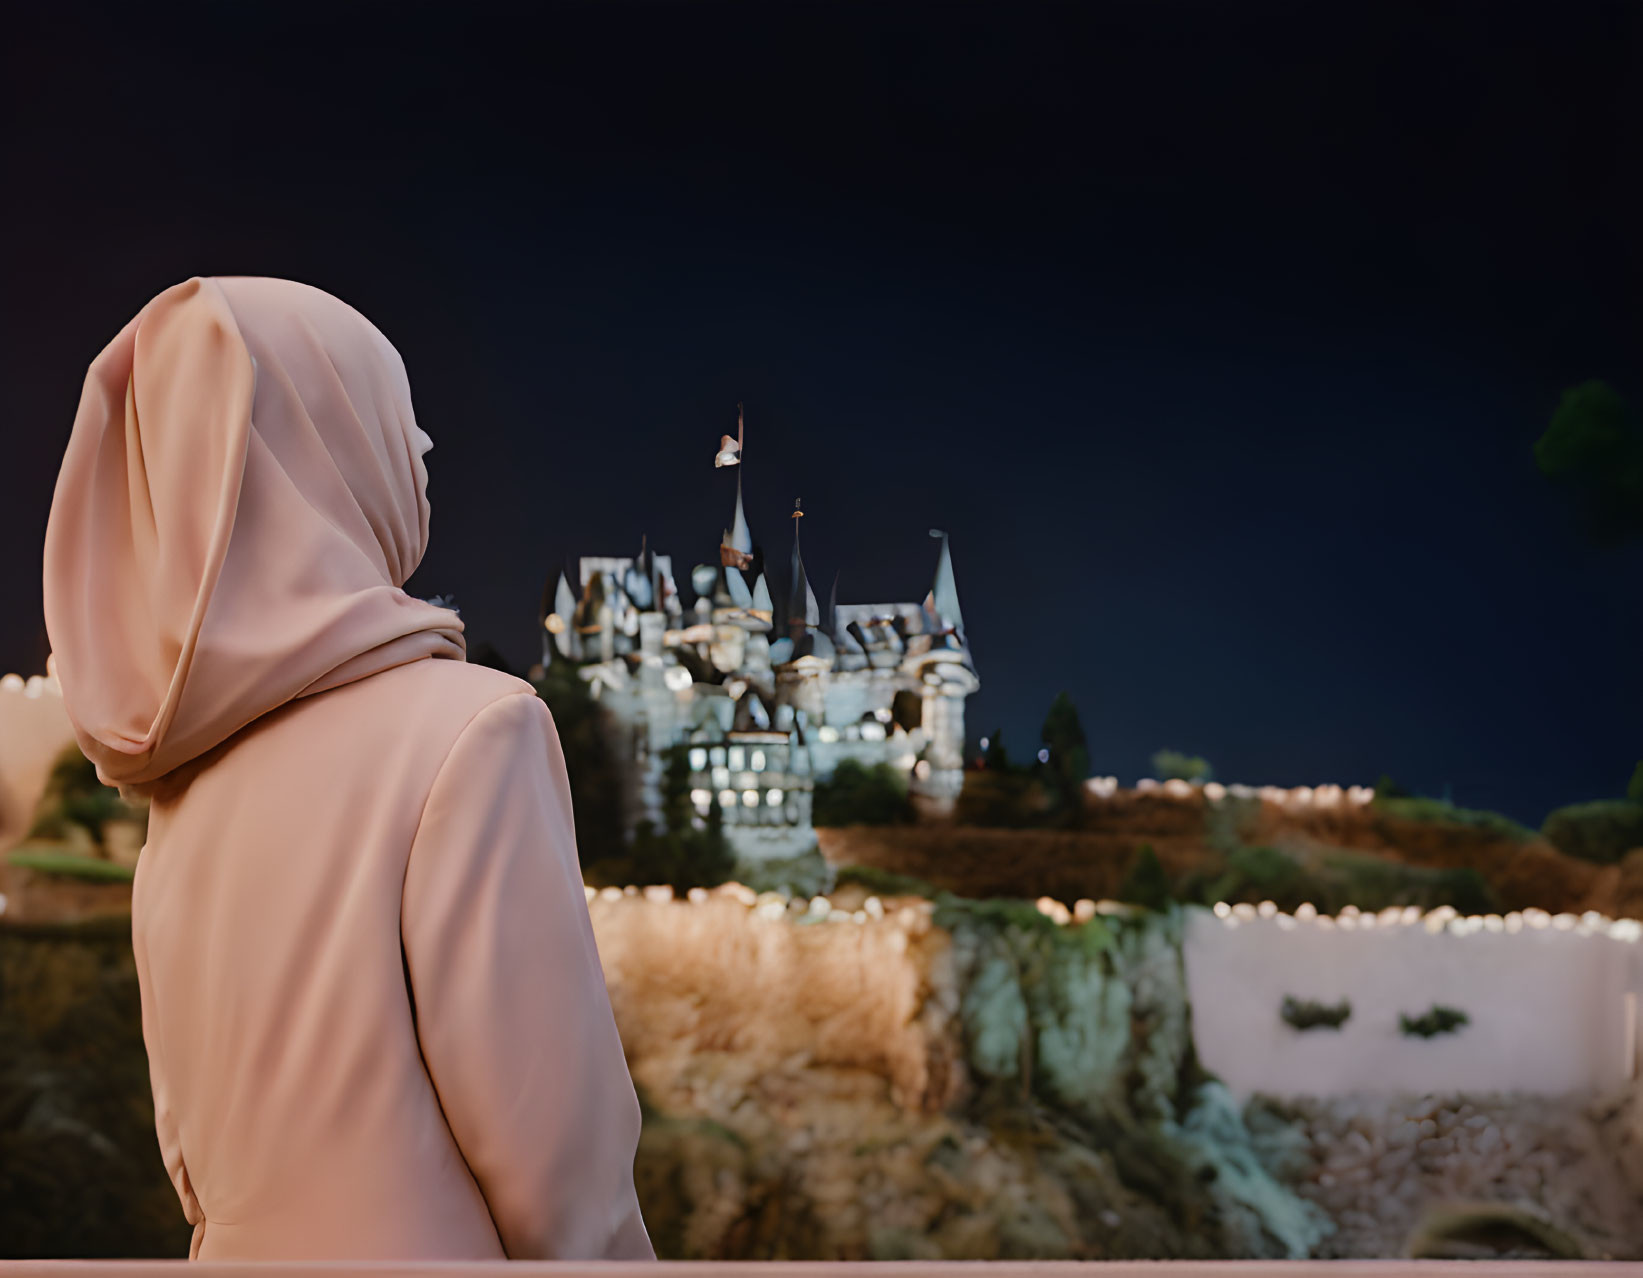 Person in pink hijab gazes at illuminated castle at night